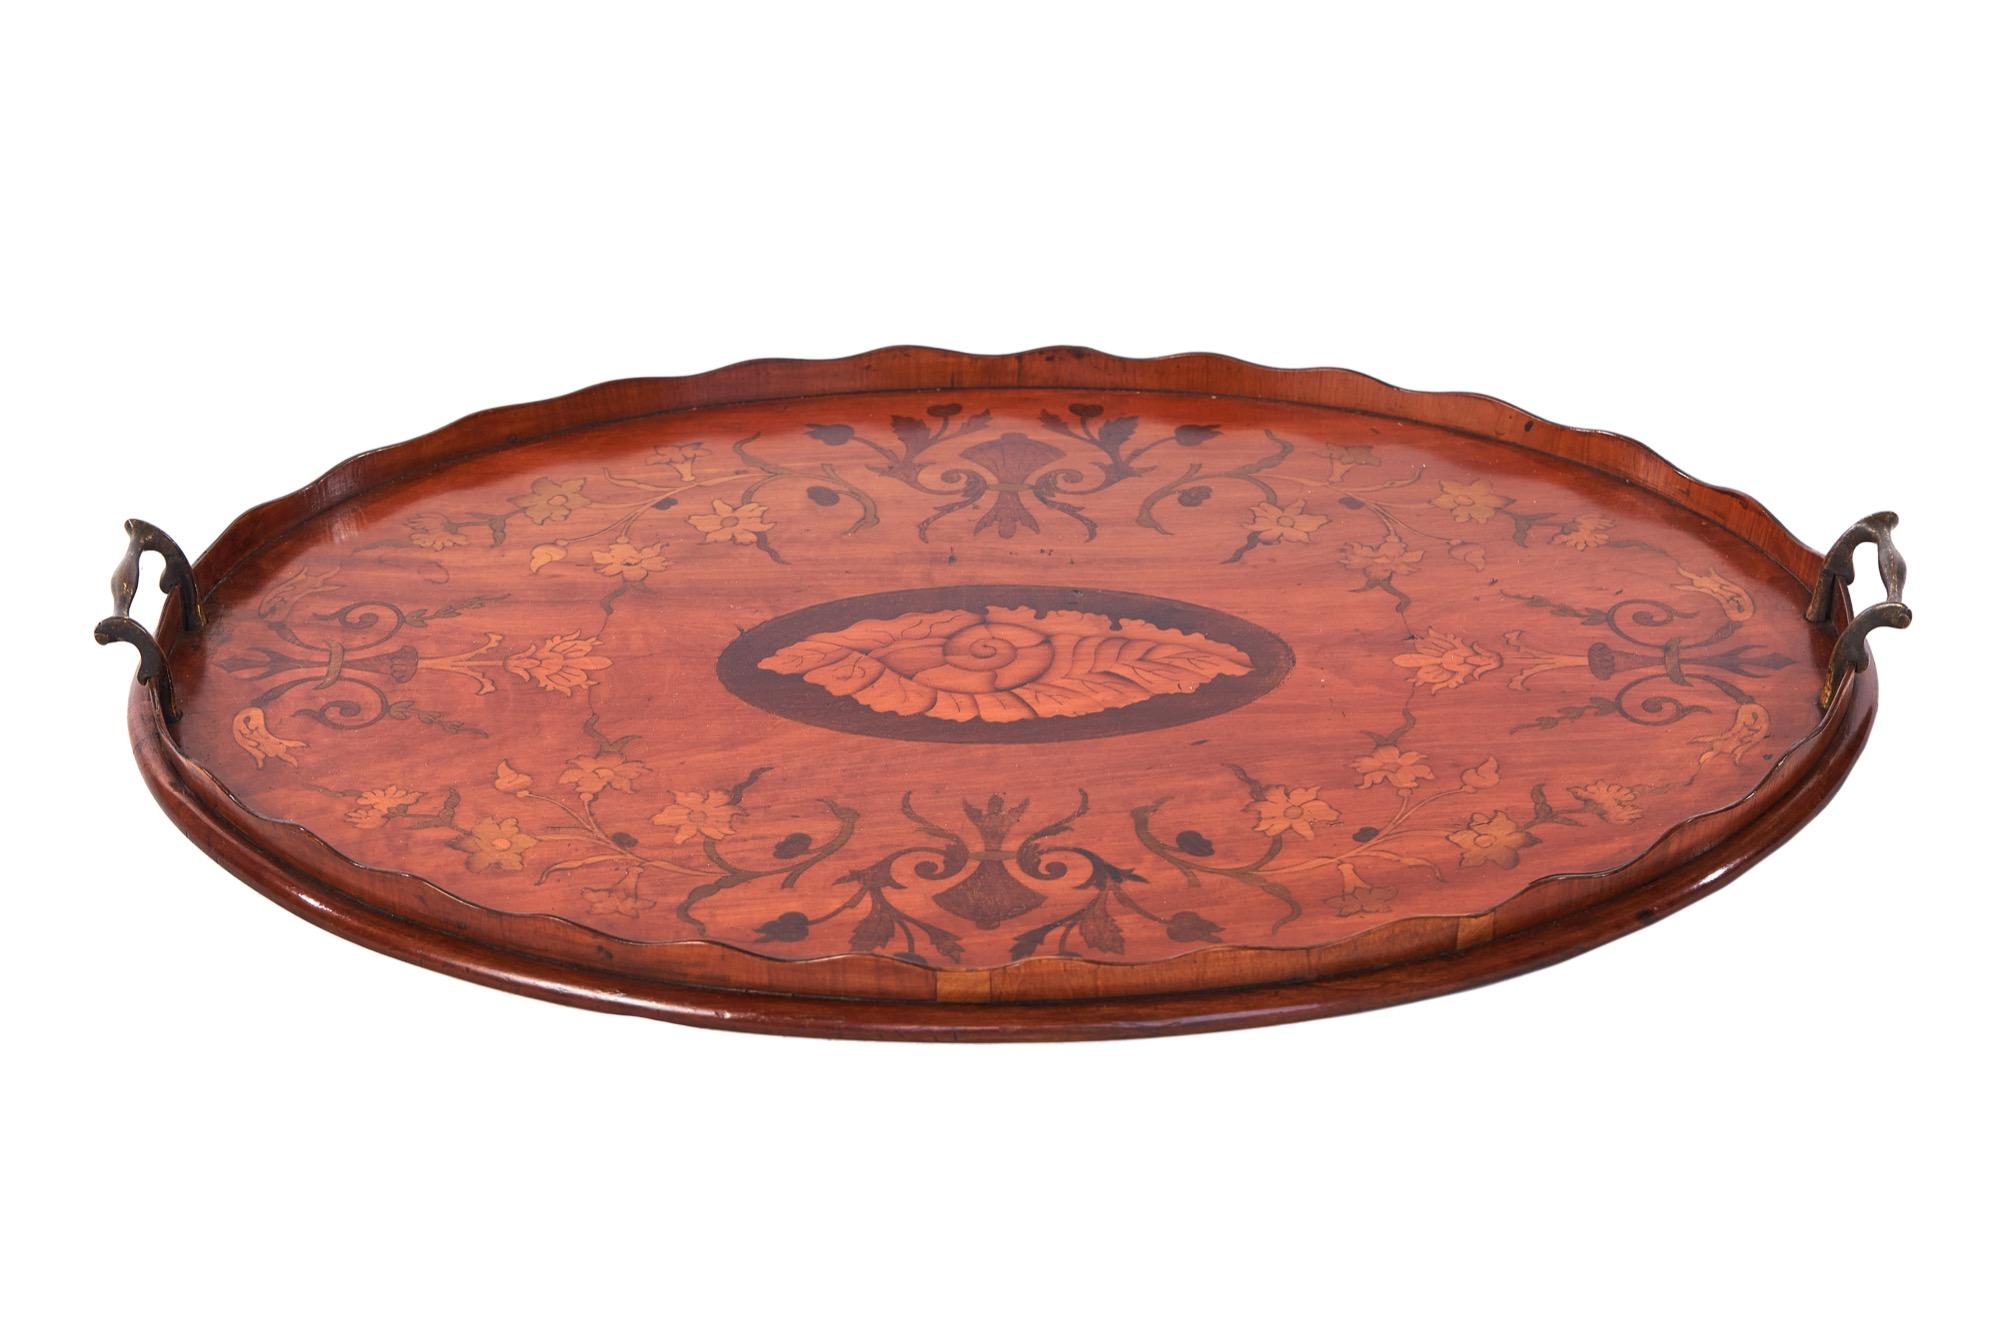 Antique Sheraton revival oval satinwood inlaid serving tray having beautiful intricate inlay of scrolls, foliage and petals with an inlaid conch shell to the centre. It has the original brass shaped carrying handles and is in wonderful original